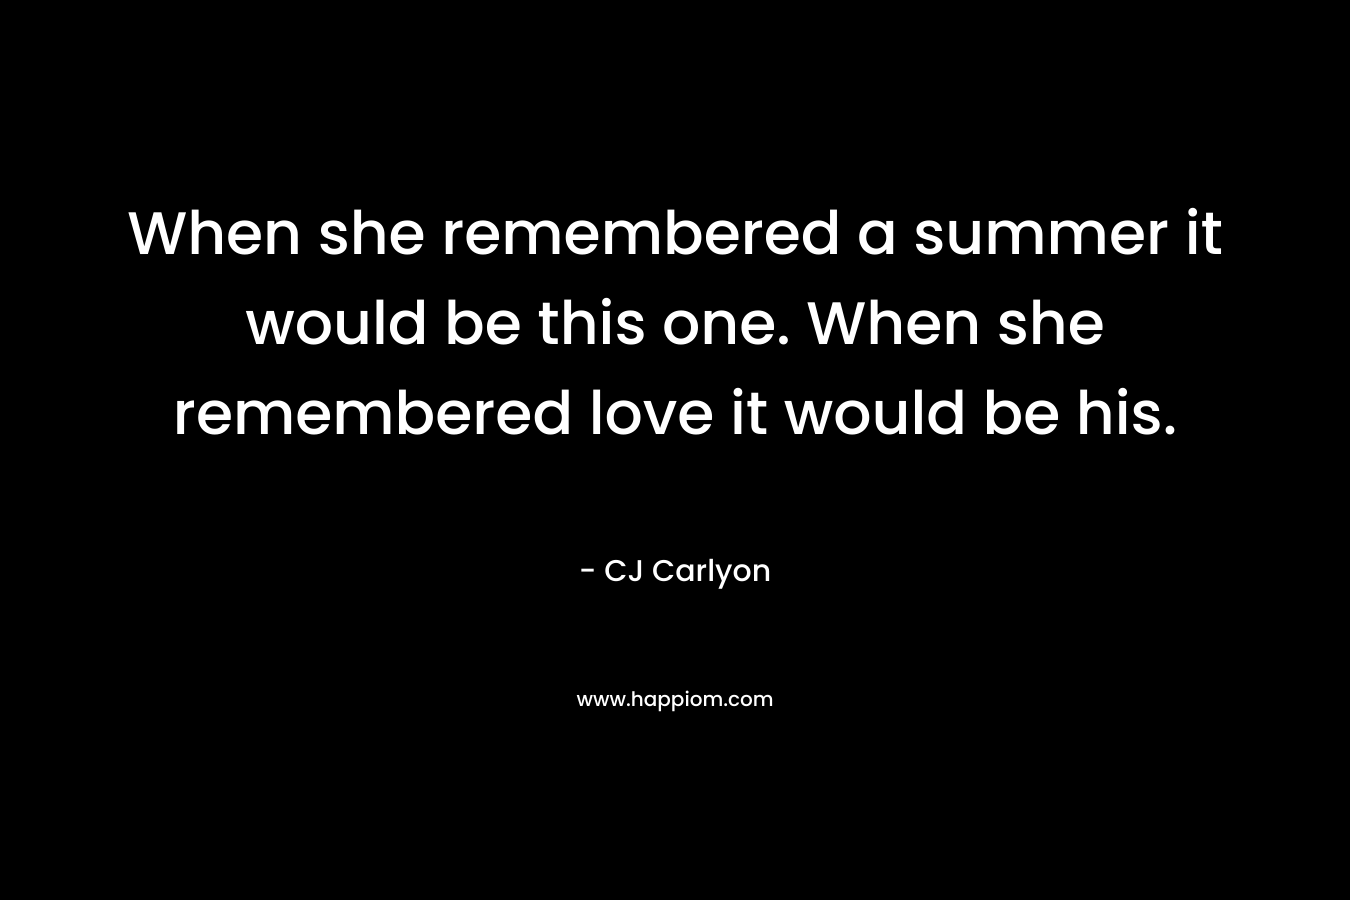 When she remembered a summer it would be this one. When she remembered love it would be his.